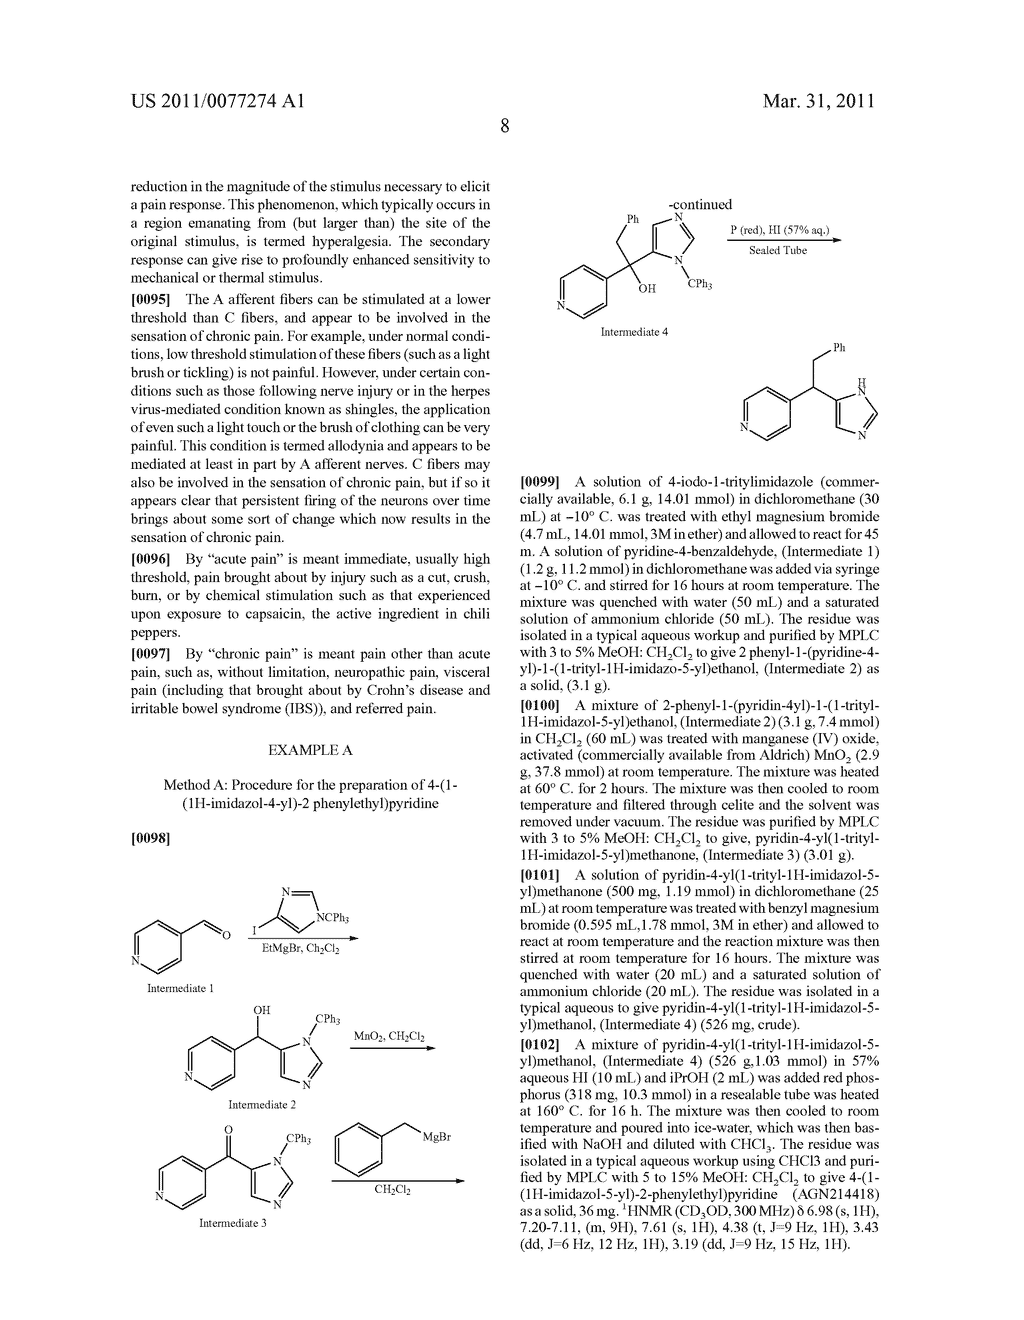 SUBSTITUTED-ARYL-2-PHENYLETHYL-1H-IMIDAZOLE COMPOUNDS AS SUBTYPE SELECTIVE MODULATORS OF ALPHA 2B AND/OR ALPHA 2C ADRENERGIC RECEPTORS - diagram, schematic, and image 09